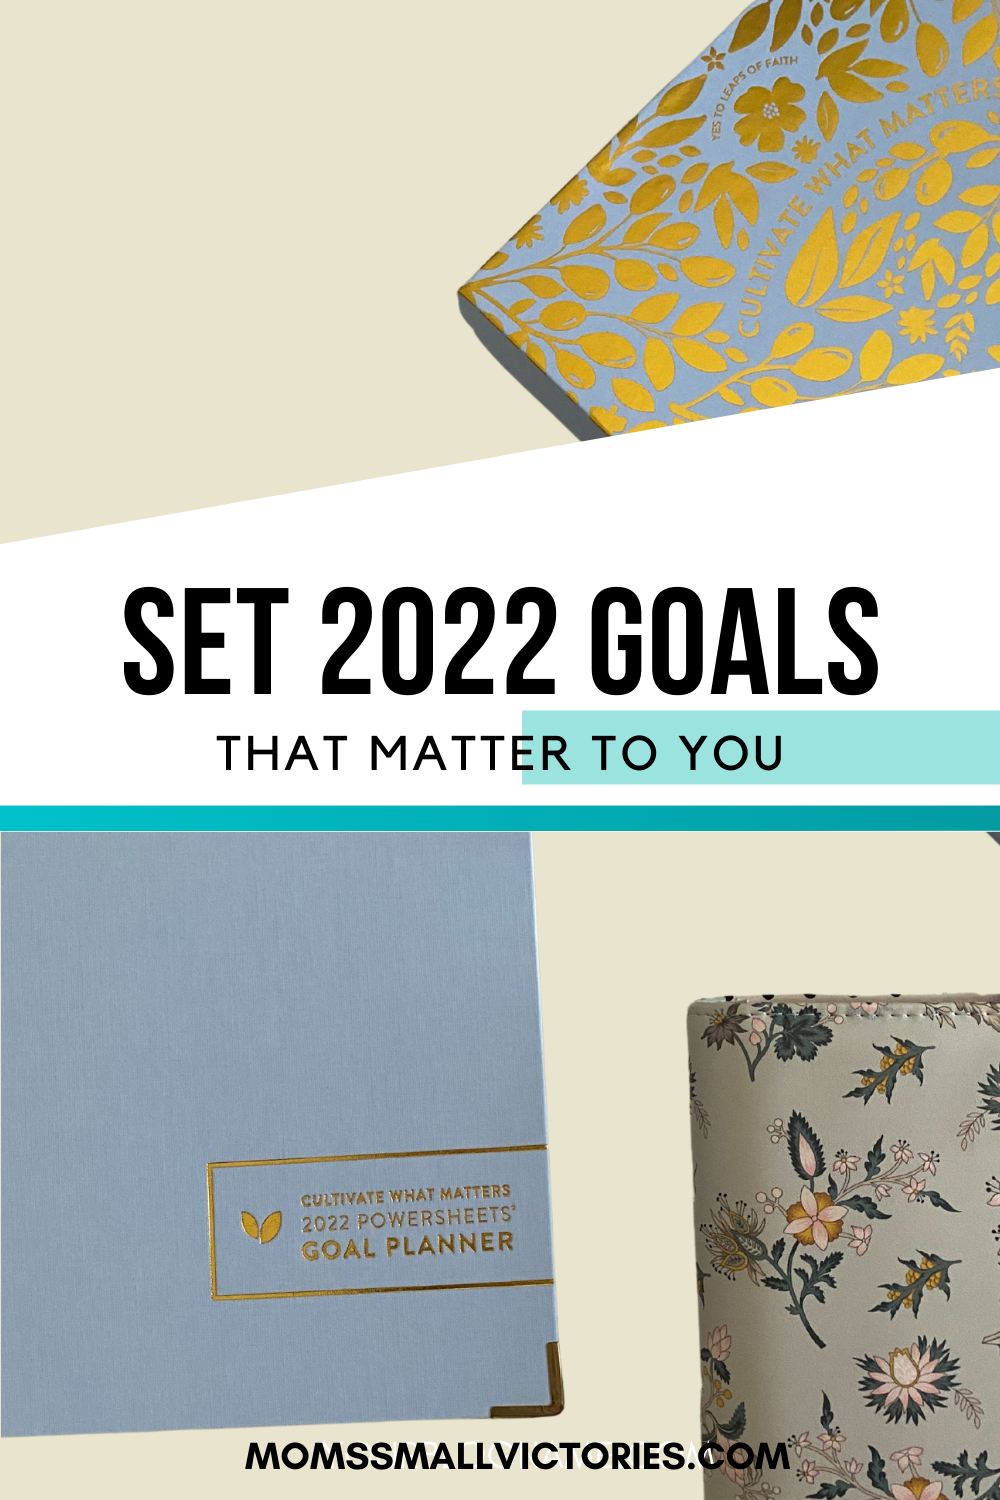 Set the 2022 goals that matter to you and break them down into actionable steps you can achieve. Pictured: Powersheets goal planner in Clear Skies cover, Cultivate What Matters gold foiled keepsake box and Franklin Planner Wild Asparagus green floral binder.